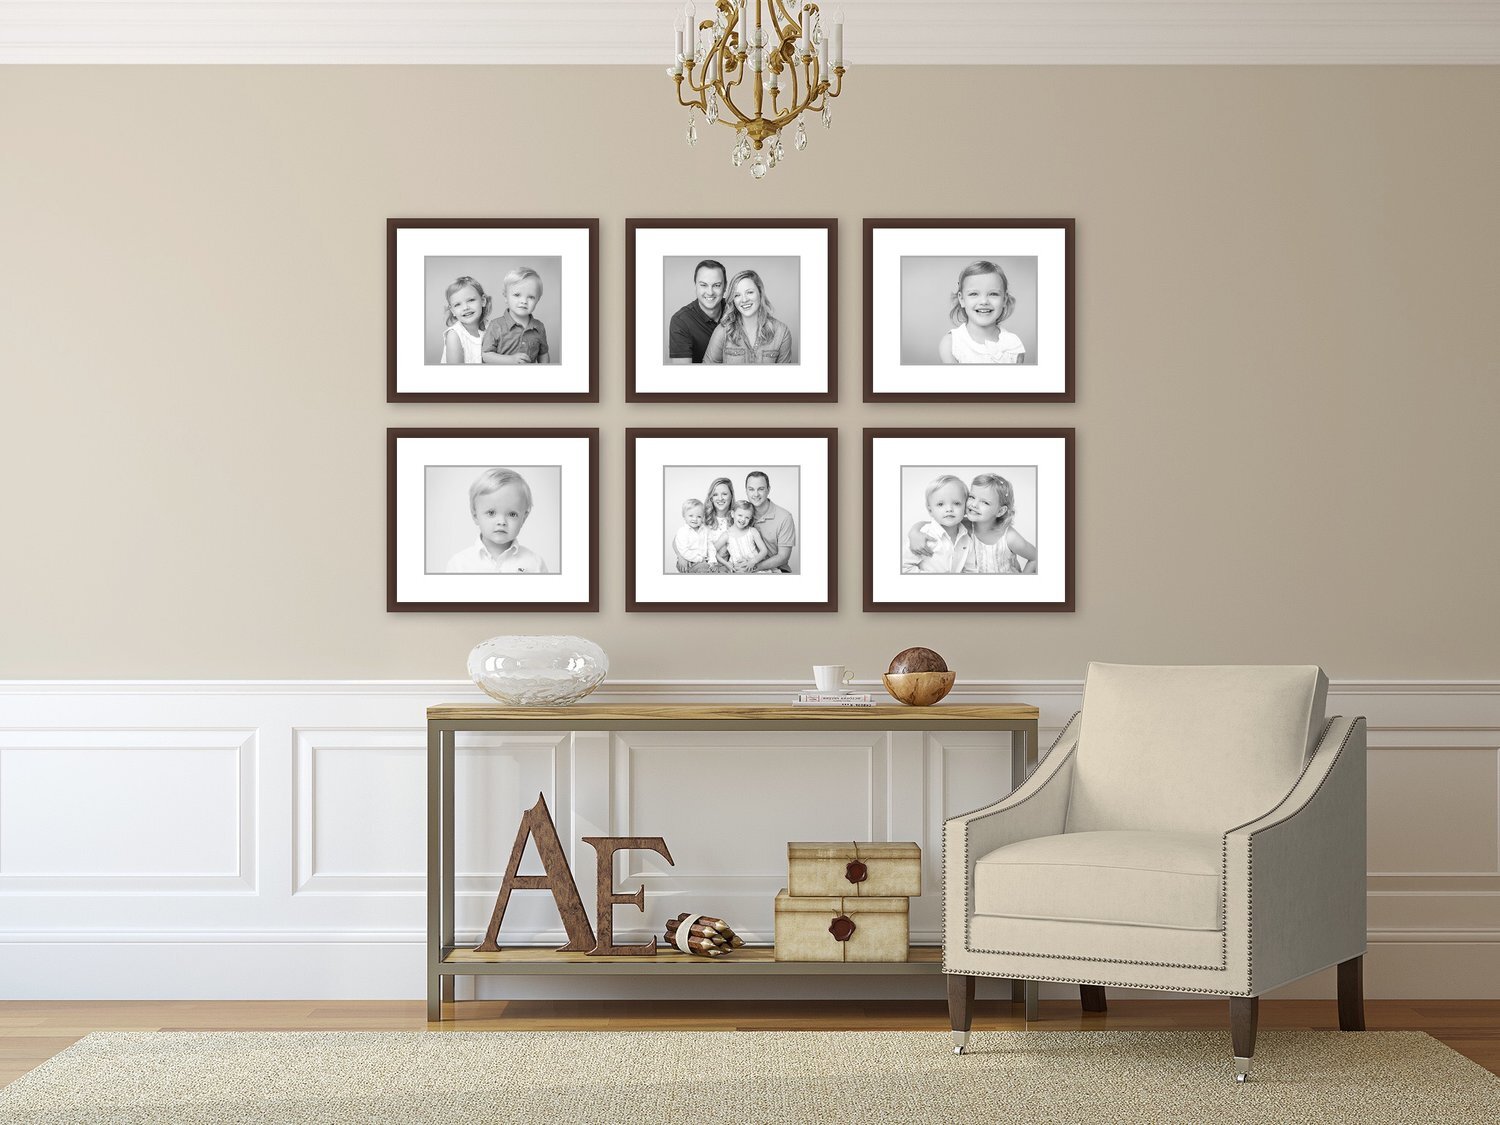 How to measure and hang a grid gallery wall! Dining room art with